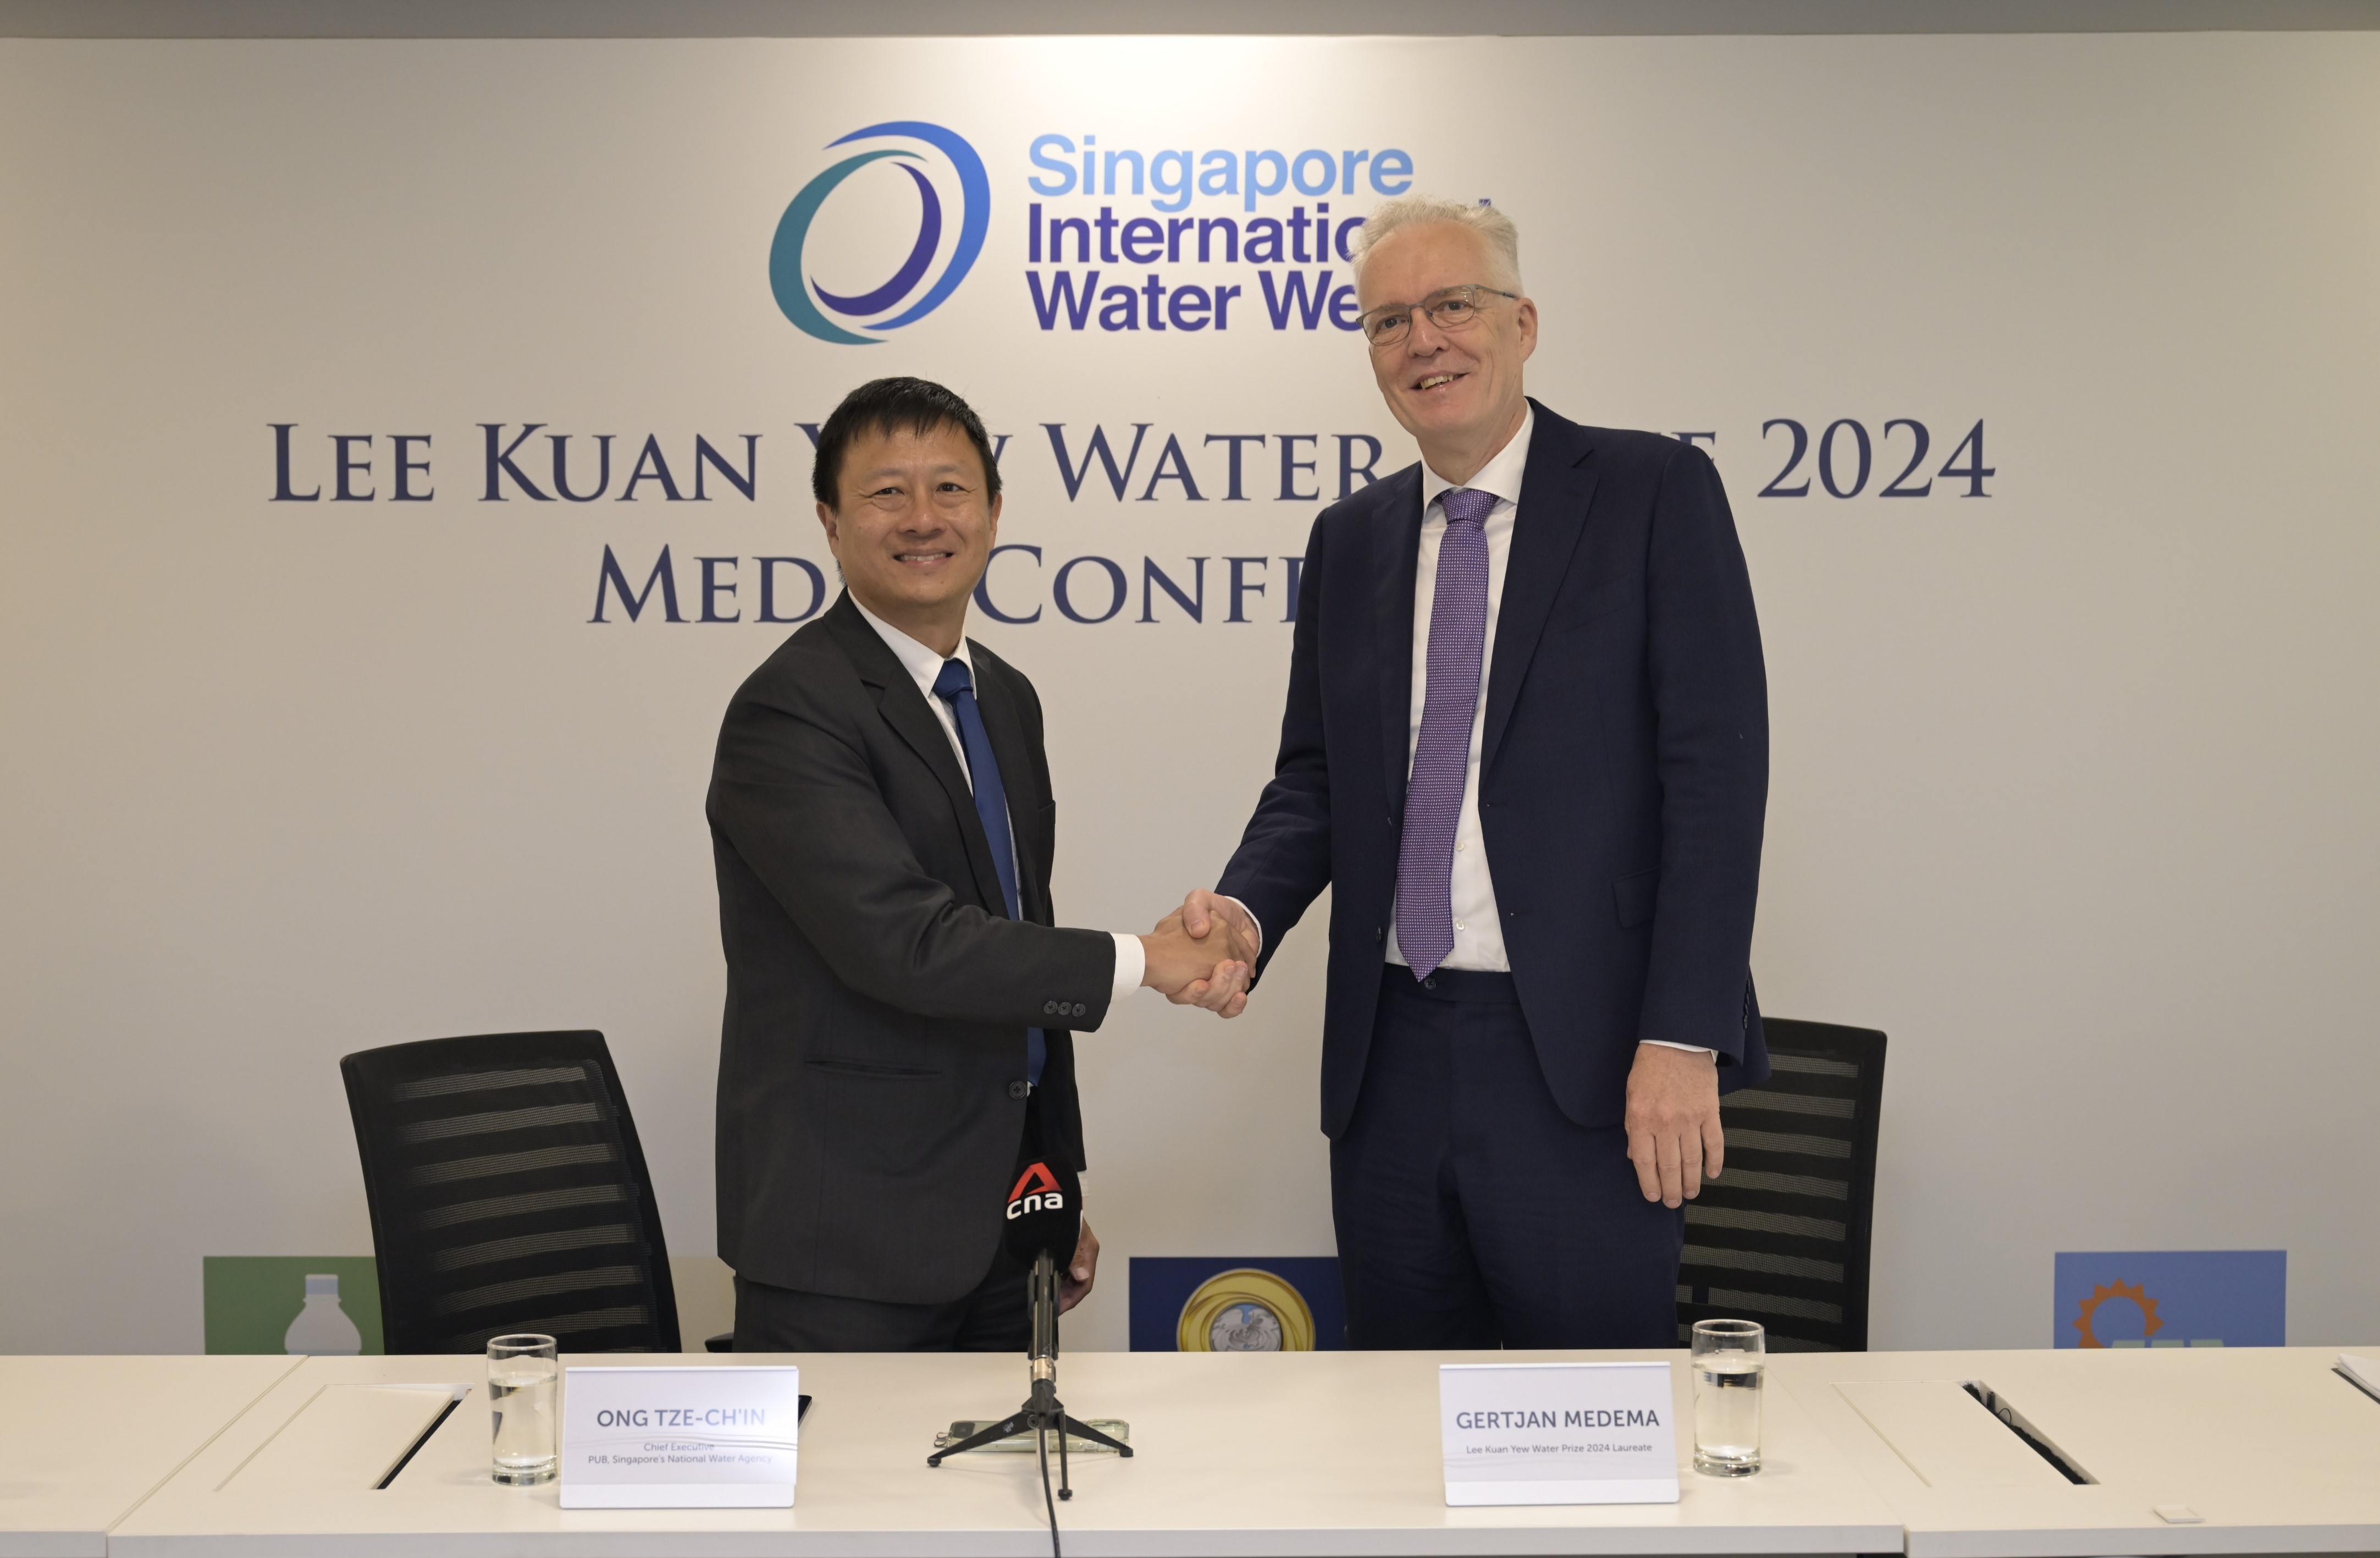 (From Left) Mr Ong Tze-Chin, Chief Executive, PUB, Singapores National Water Agency congratulated the Lee Kuan Yew Water Prize 2024 Laureate, Professor Gertjan Medema, Principal Microbiologist of the KWR Water Research Institute.